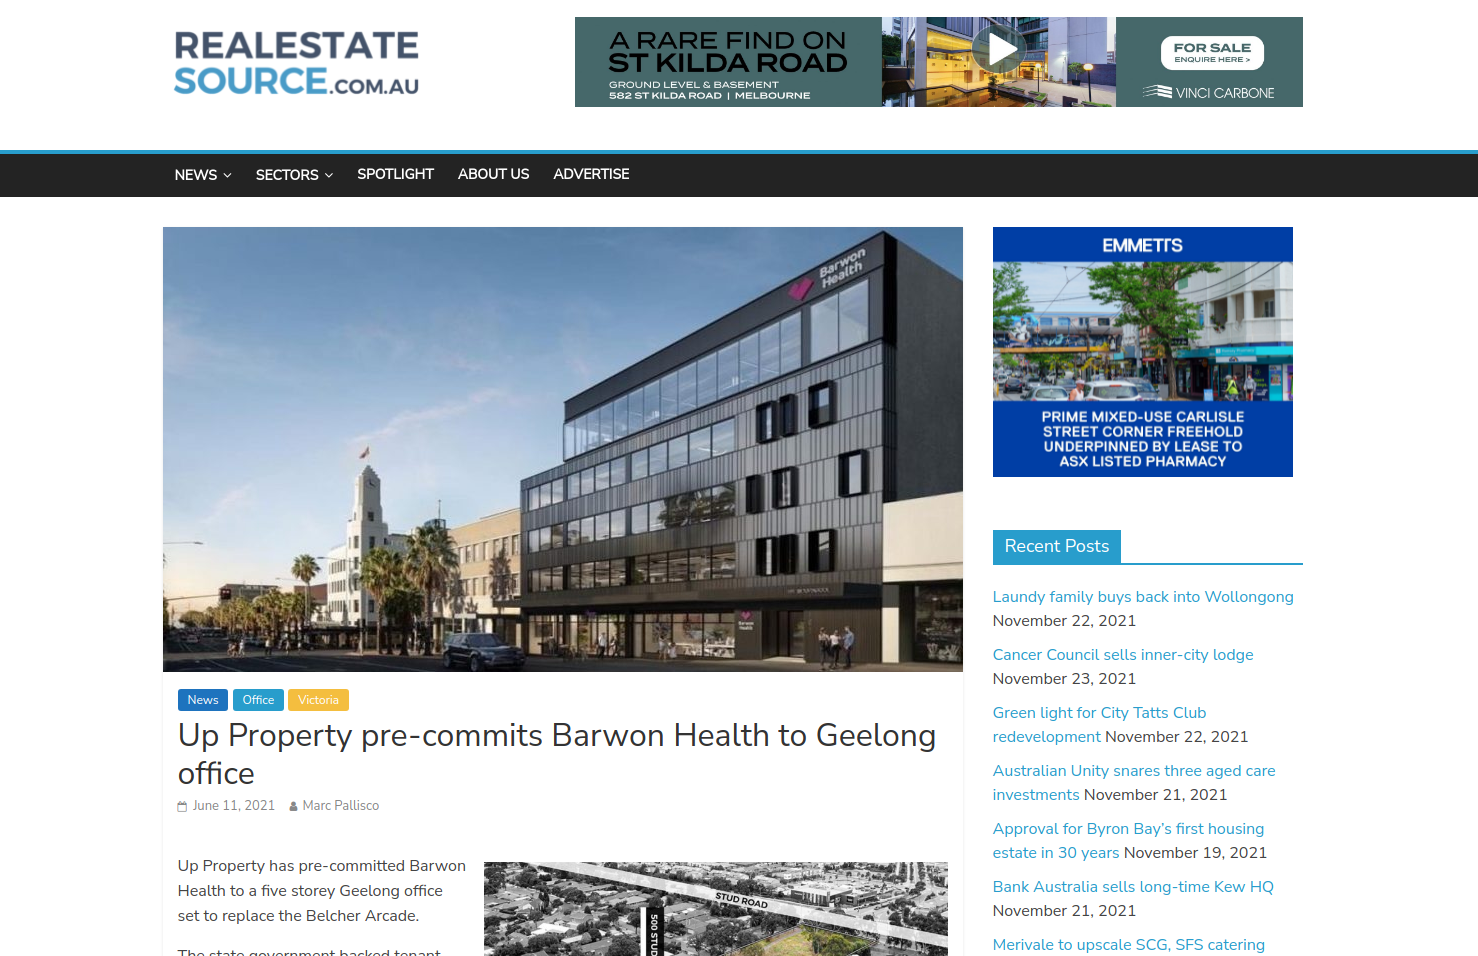 Up Property pre-commits Barwon Health to Geelong office